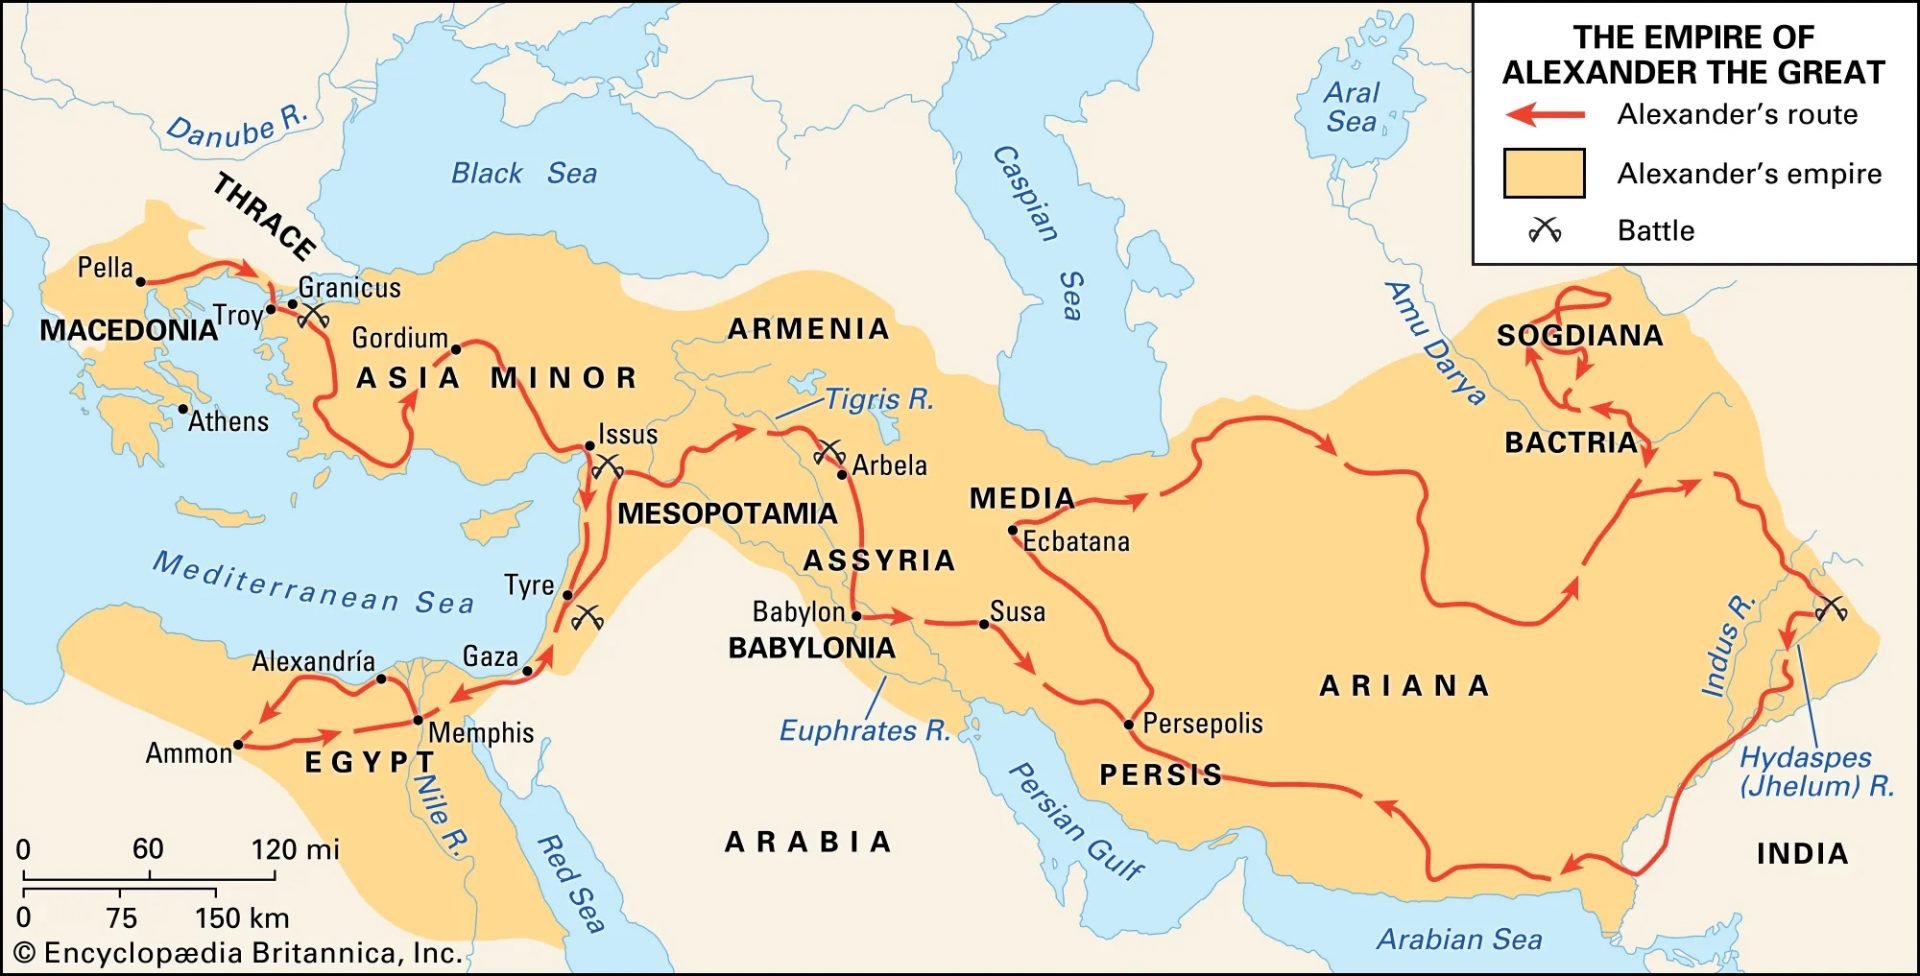 Map illustrating the vast empire of Alexander the Great, showcasing his conquests stretching from Macedonia and Greece through Asia Minor, Mesopotamia, Egypt, and reaching as far as India. Red arrows depict Alexander's route of conquest, while battles are indicated with cross symbols. Key locations such as Athens, Troy, Babylon, and Alexandria are labeled, with the extents of his empire shaded in yellow.